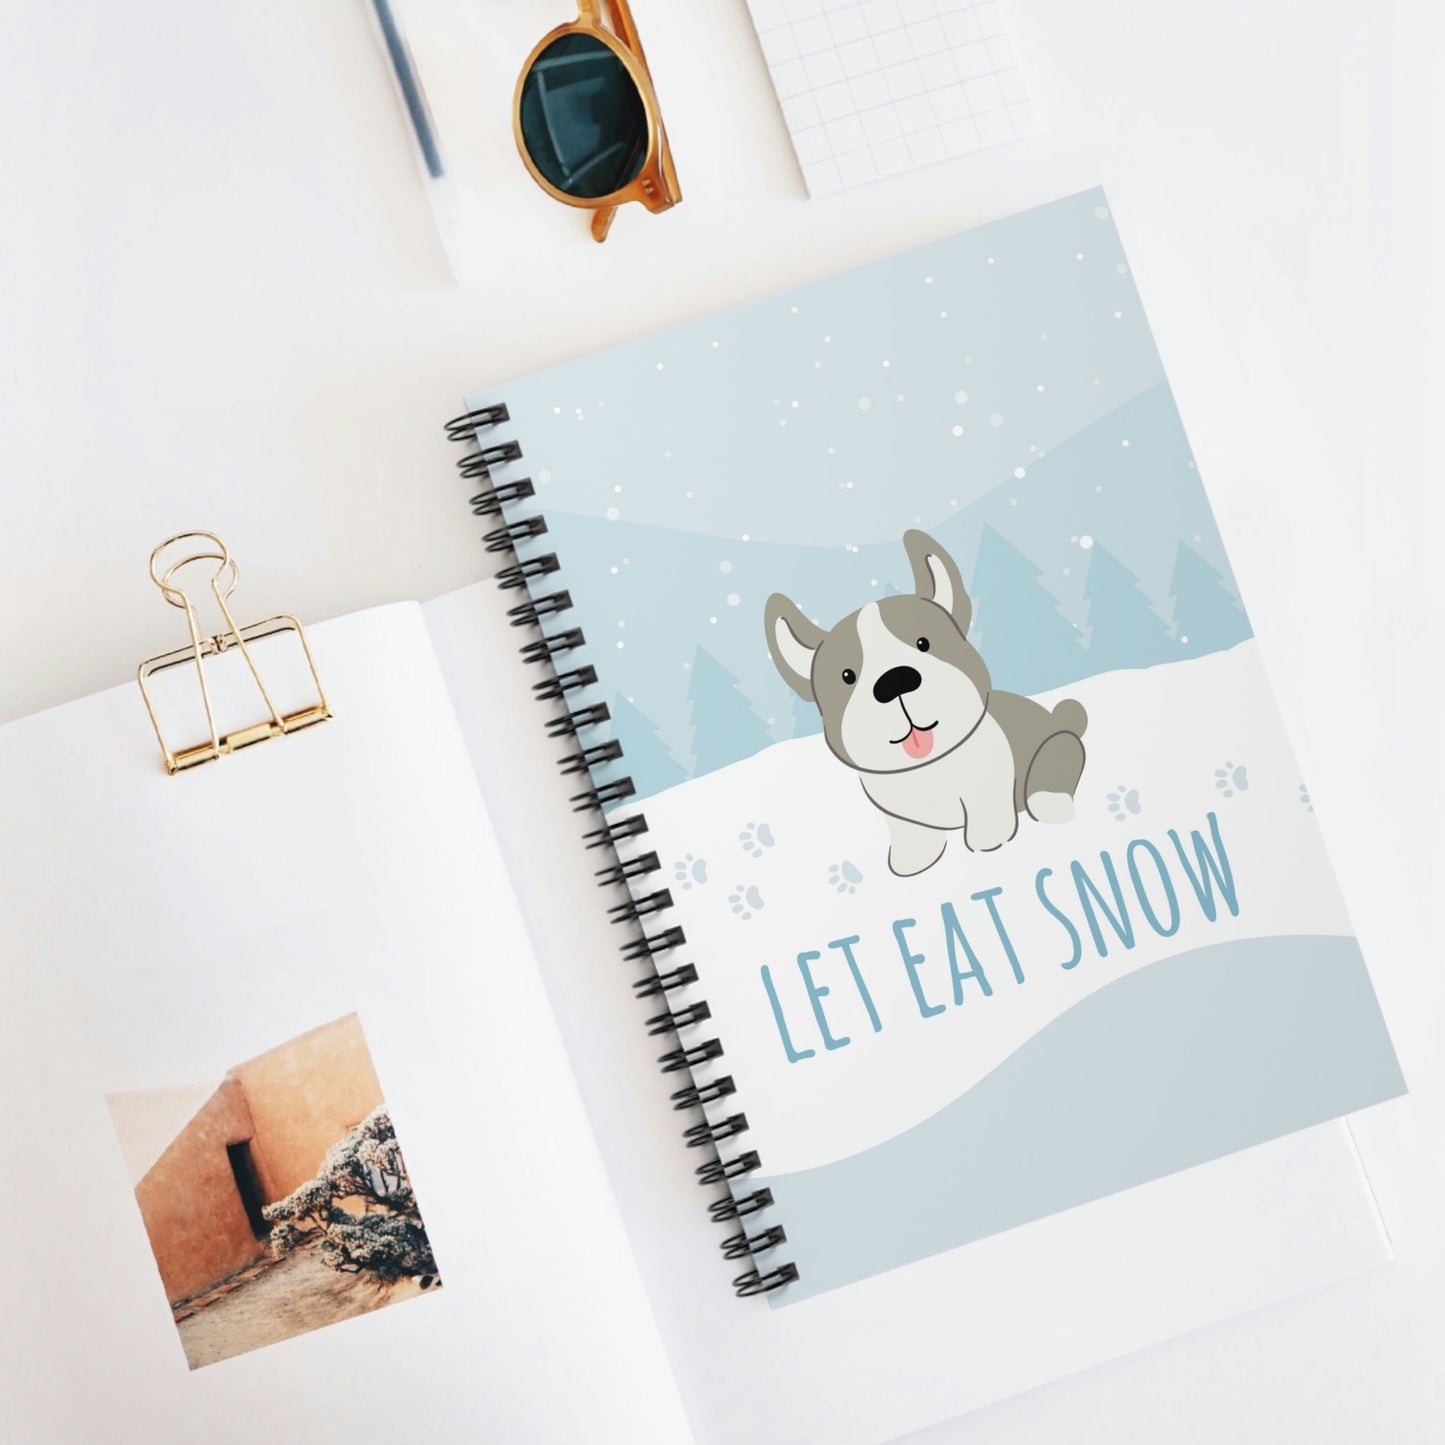 Let Eat Snow Cute Dog Anime Snow Spiral Notebook Ruled Line Ichaku [Perfect Gifts Selection]